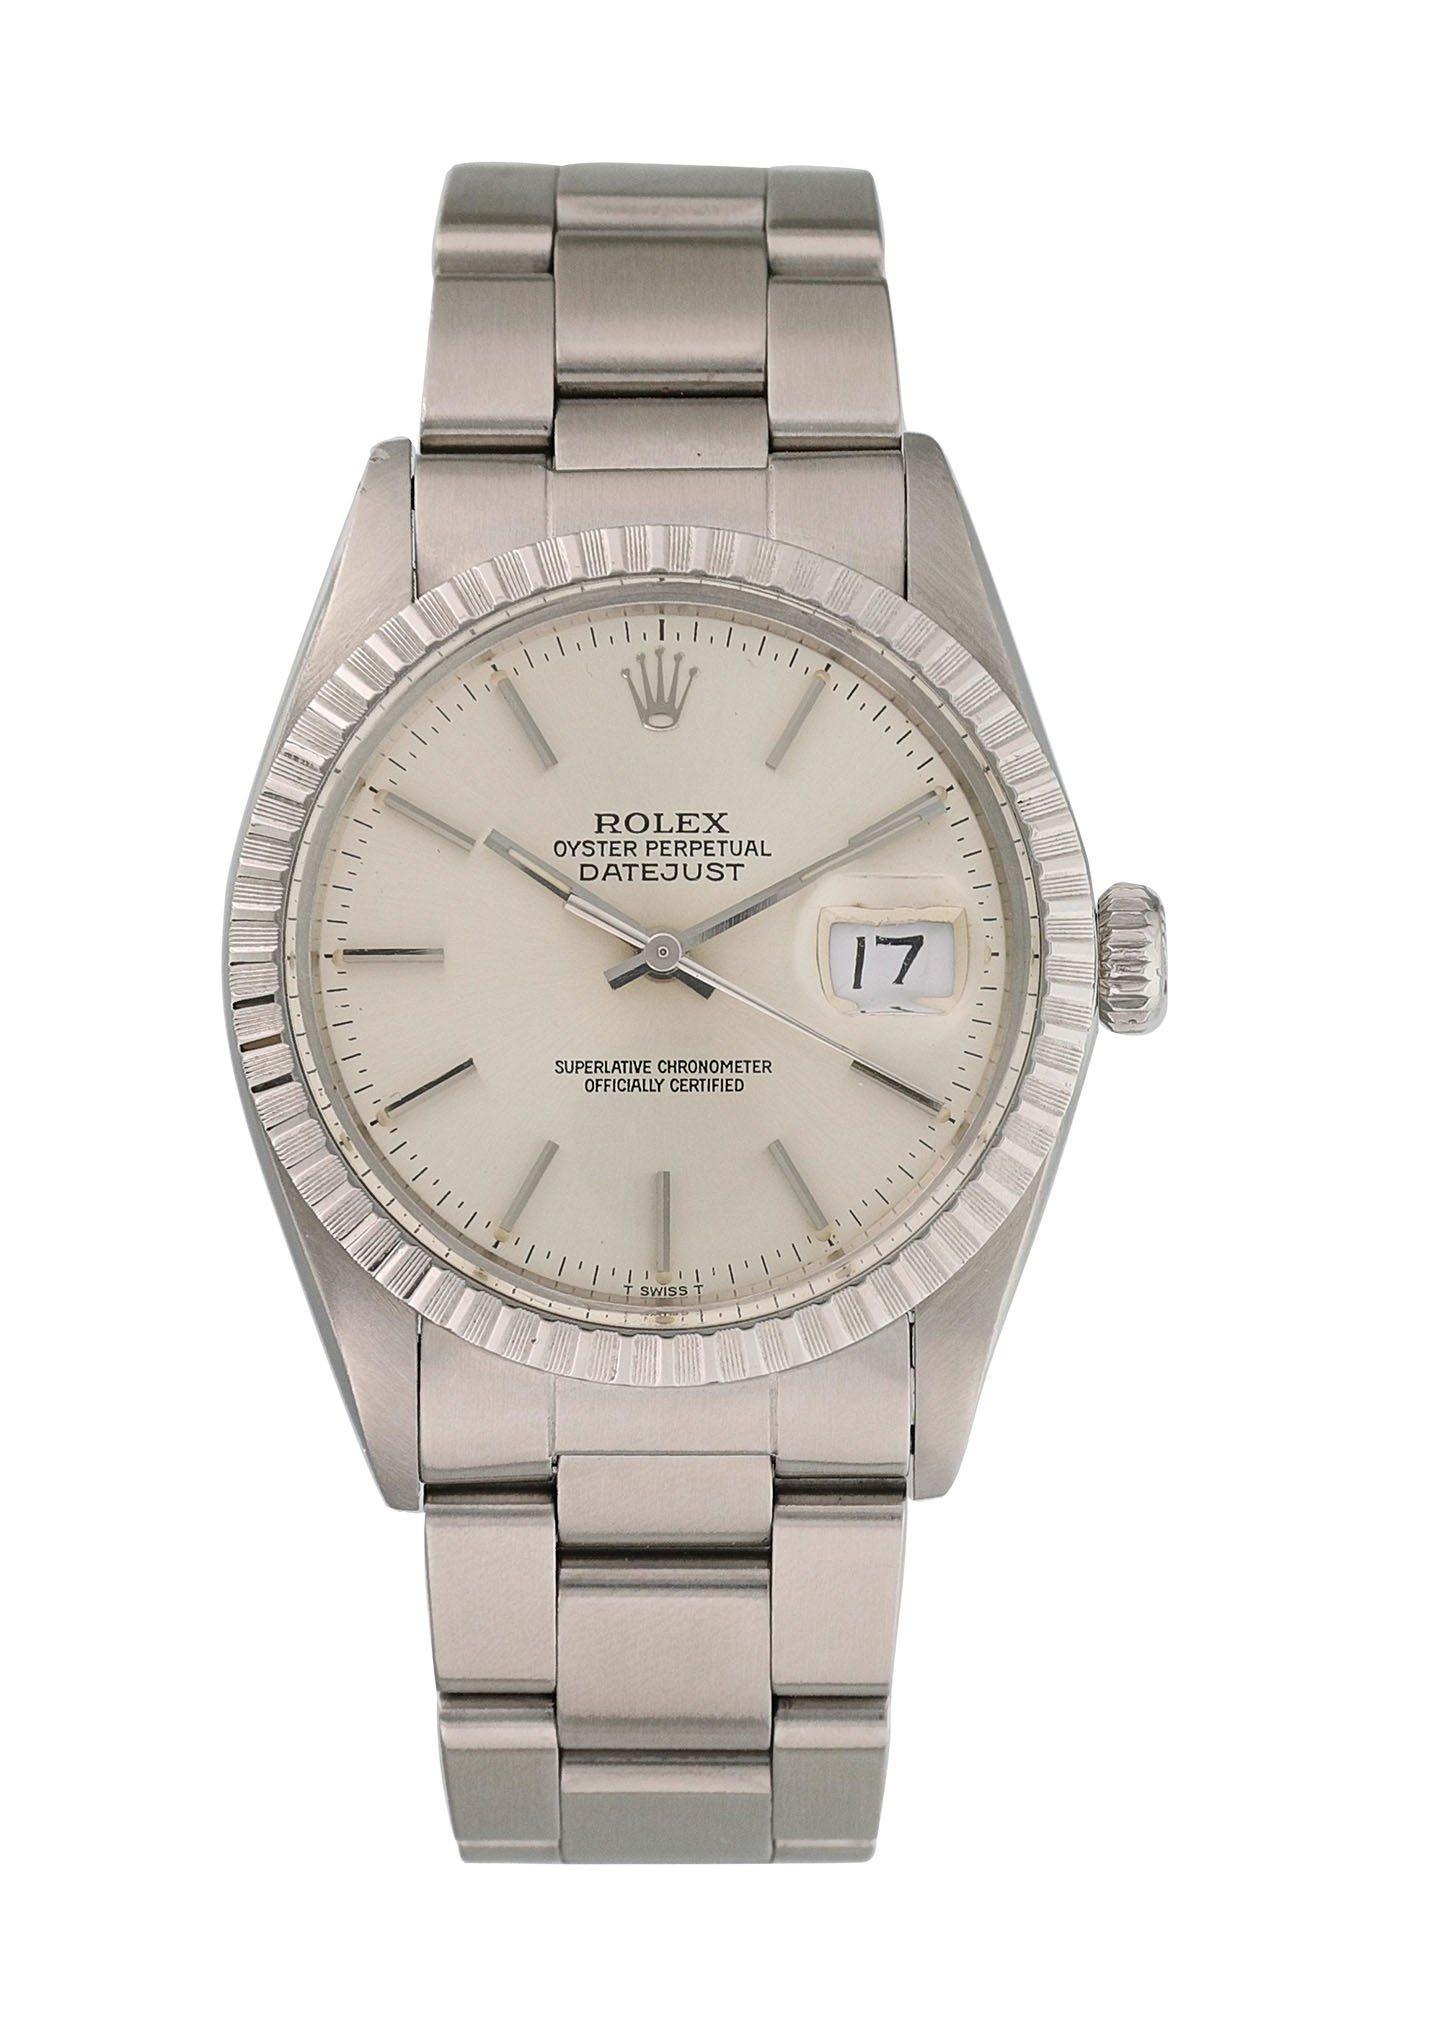 Rolex Datejust 16030 Men's Watch
36mm Stainless Steel case. 
Stainless Steel engine turn bezel. 
Silver dial with steel hands and index hour markers. 
Minute markers on the outer dial. 
Date display at the 3 o'clock position. 
Stainless Steel